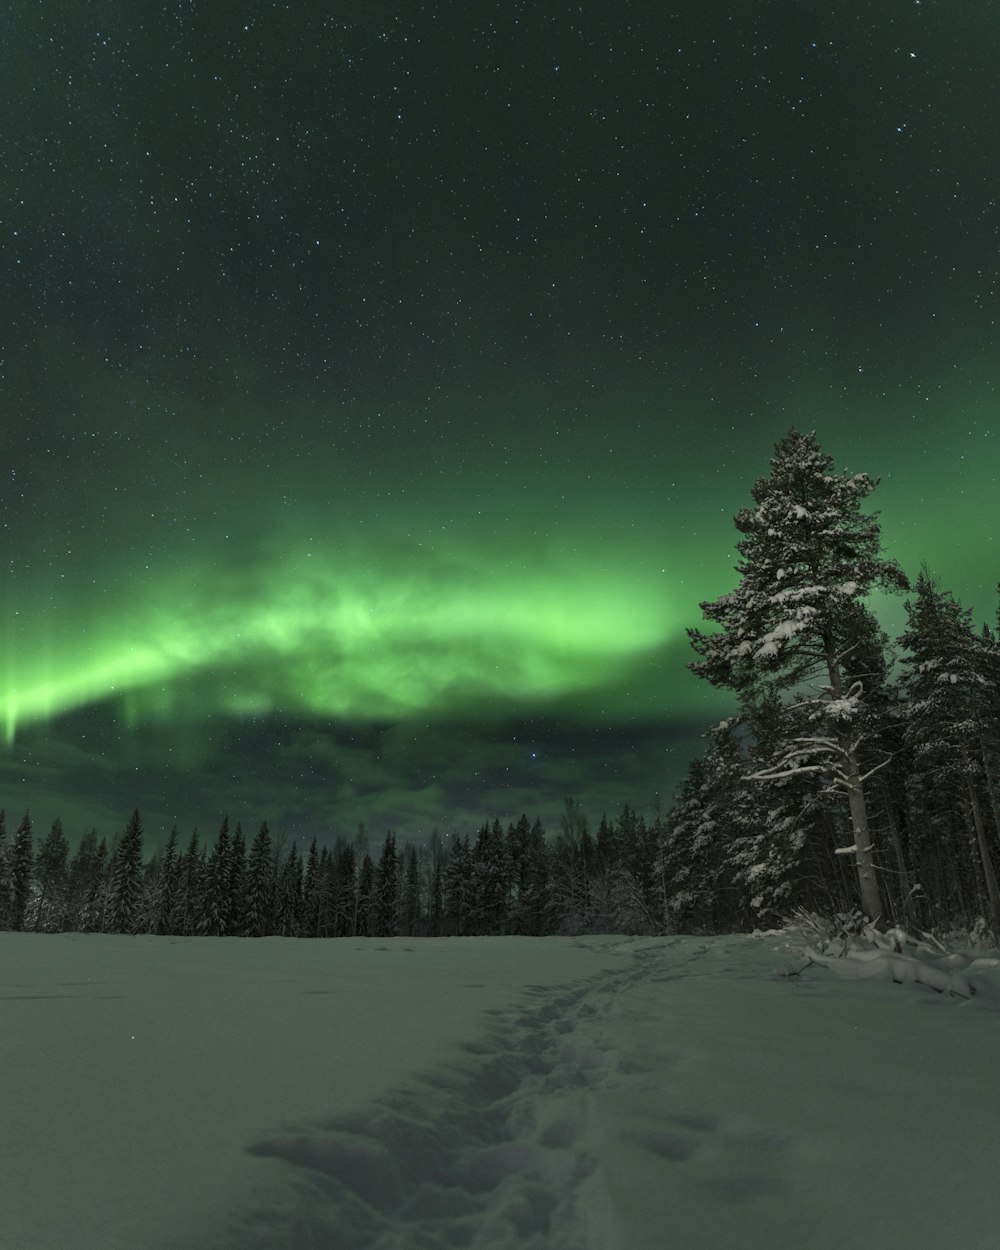 a snow covered field with trees and a green aurora light